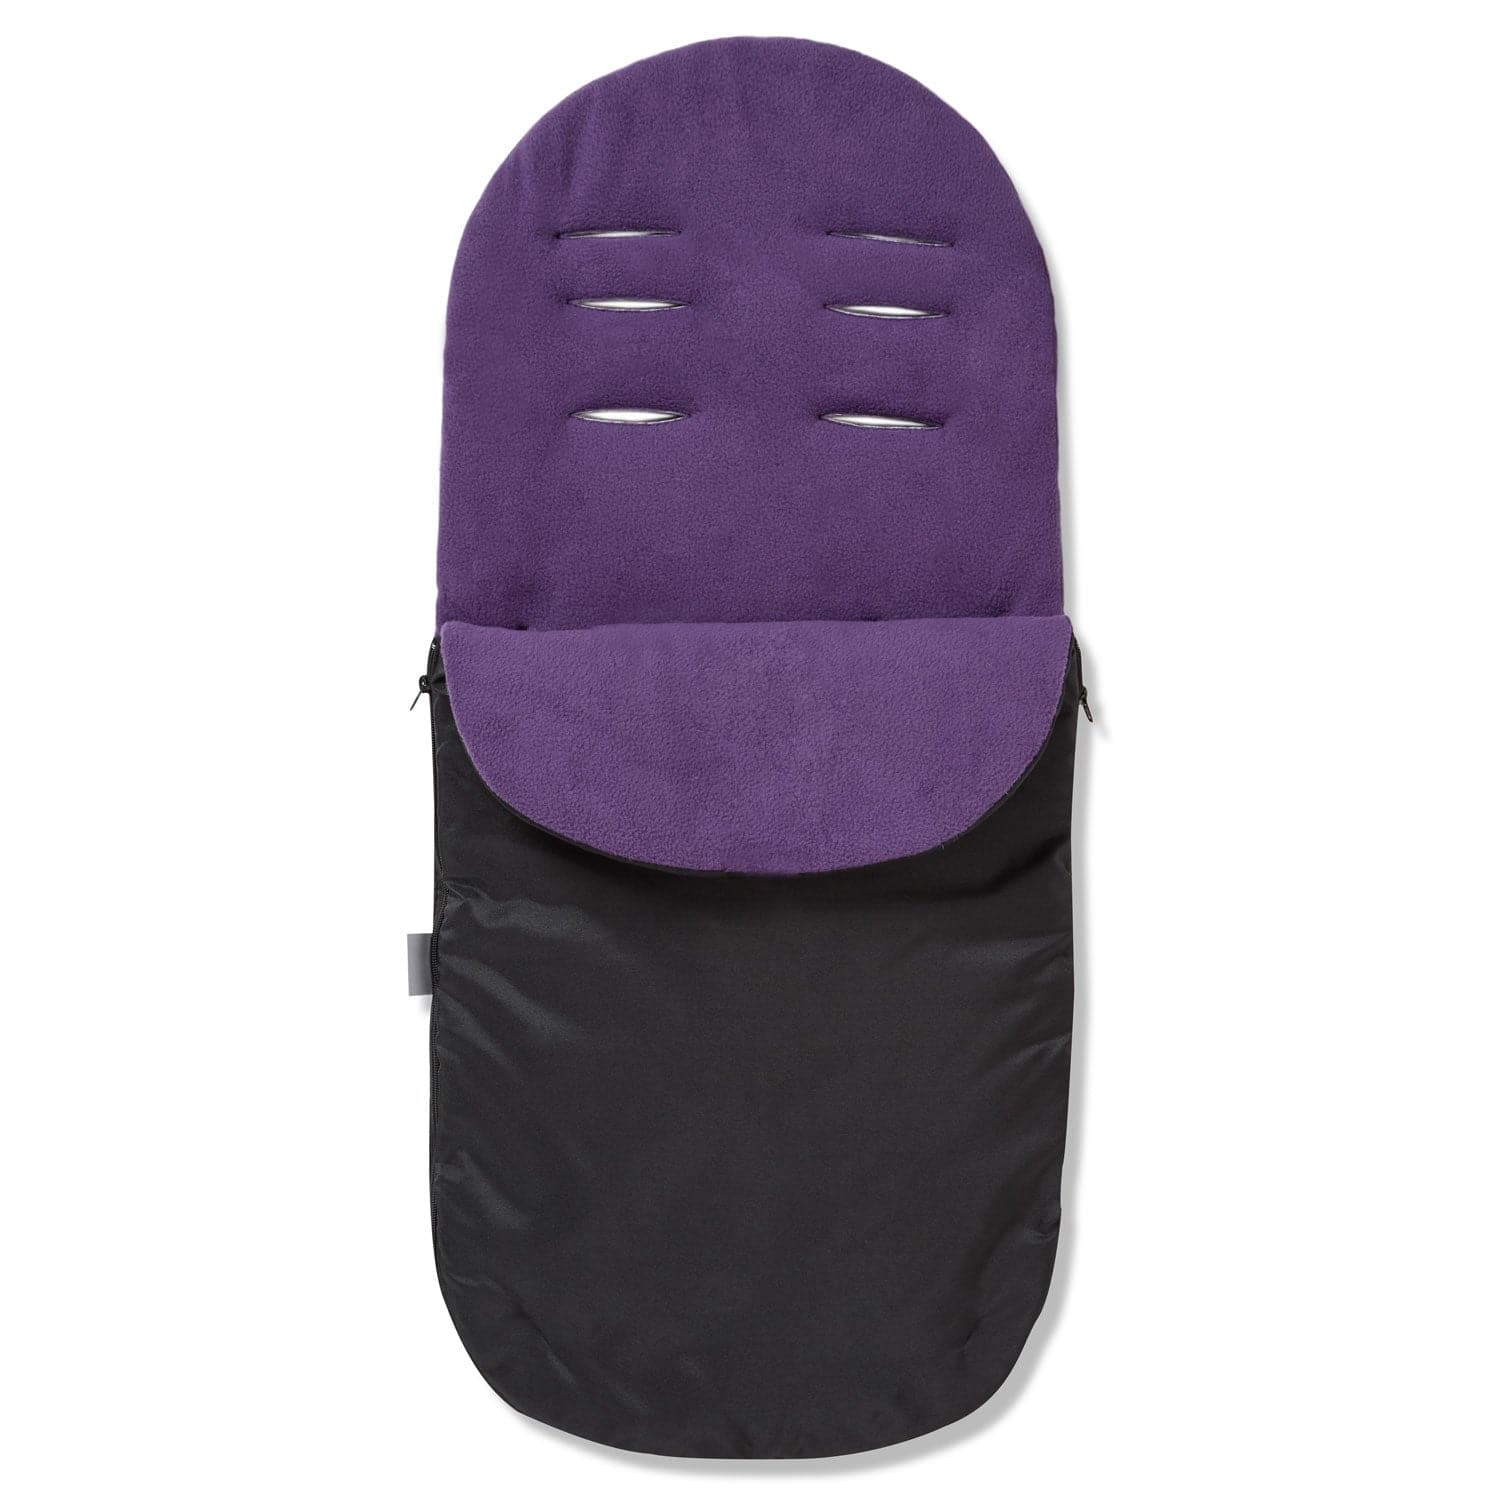 Footmuff / Cosy Toes Compatible with Tutti Bambini - Purple / Fits All Models | For Your Little One